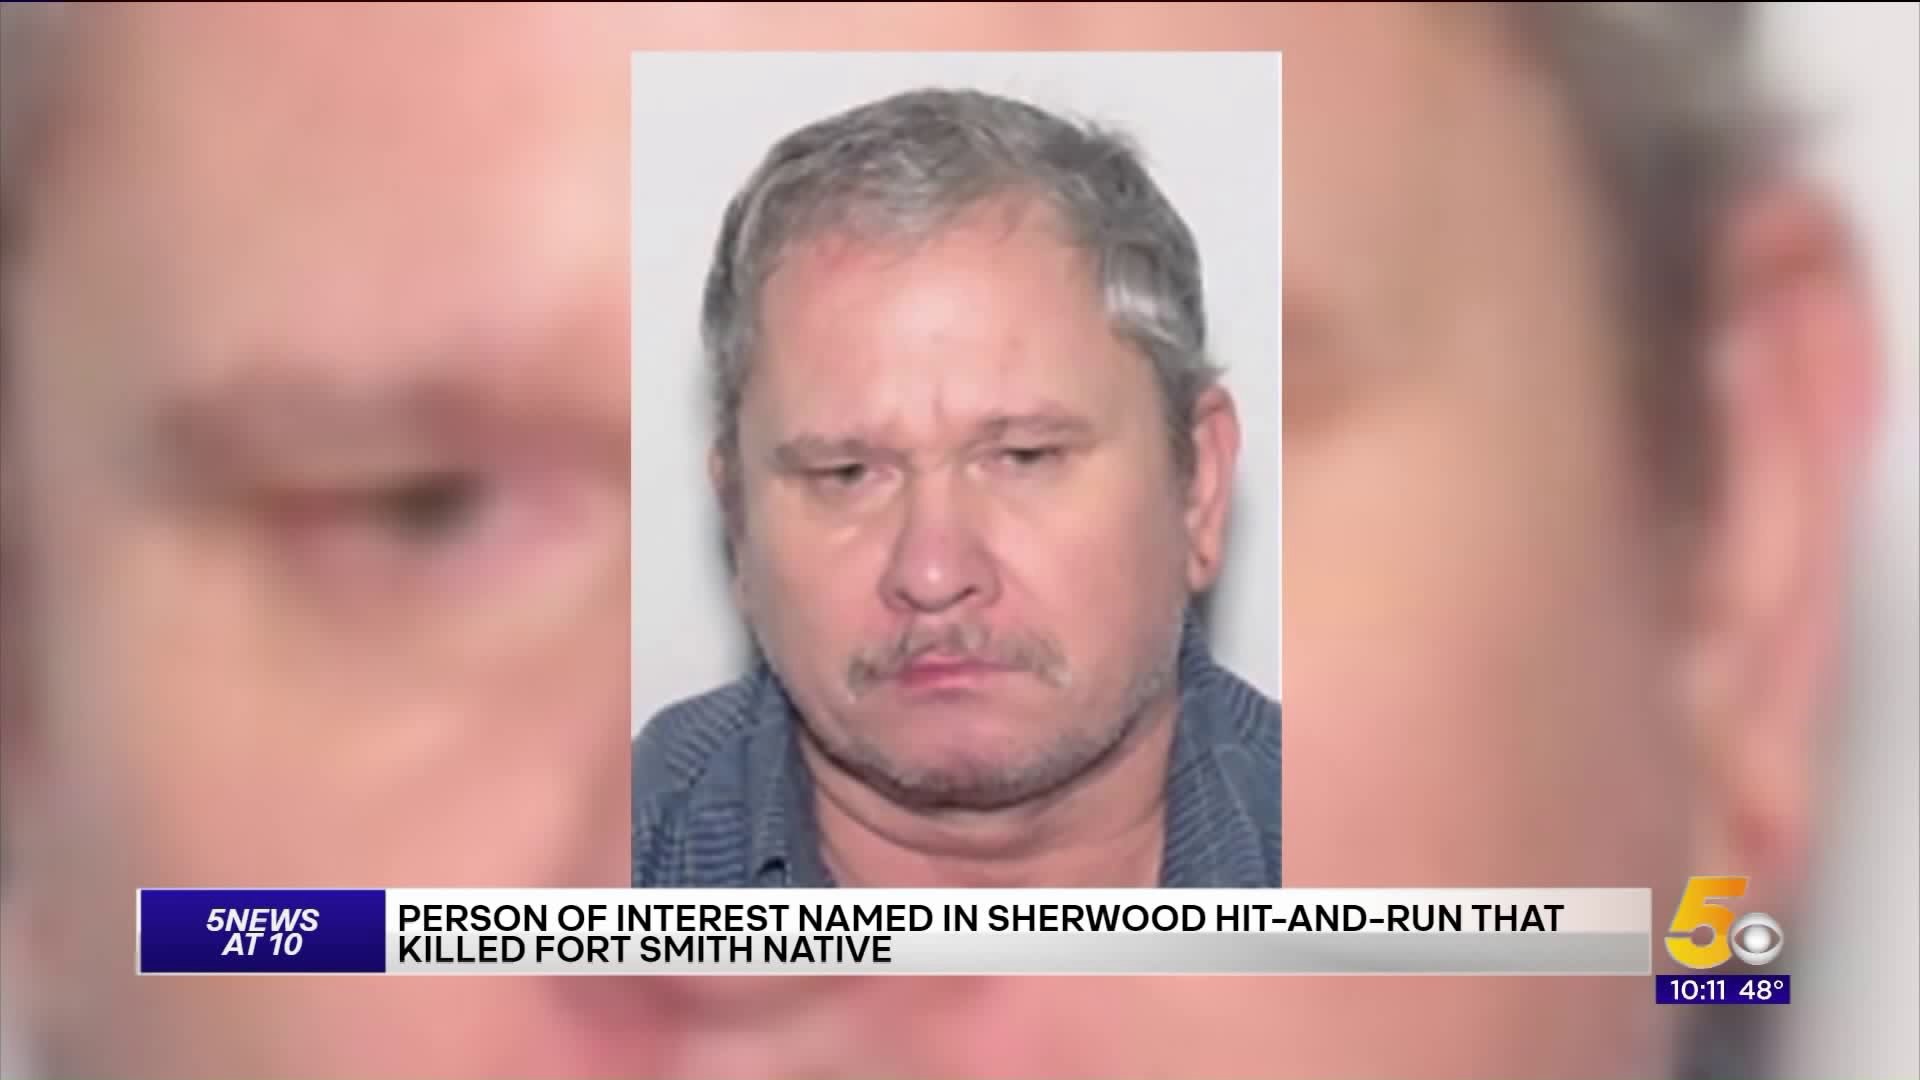 Sherwood Police Identify Person Of Interest In Connection To Cyclist Killed In Hit-And-Run